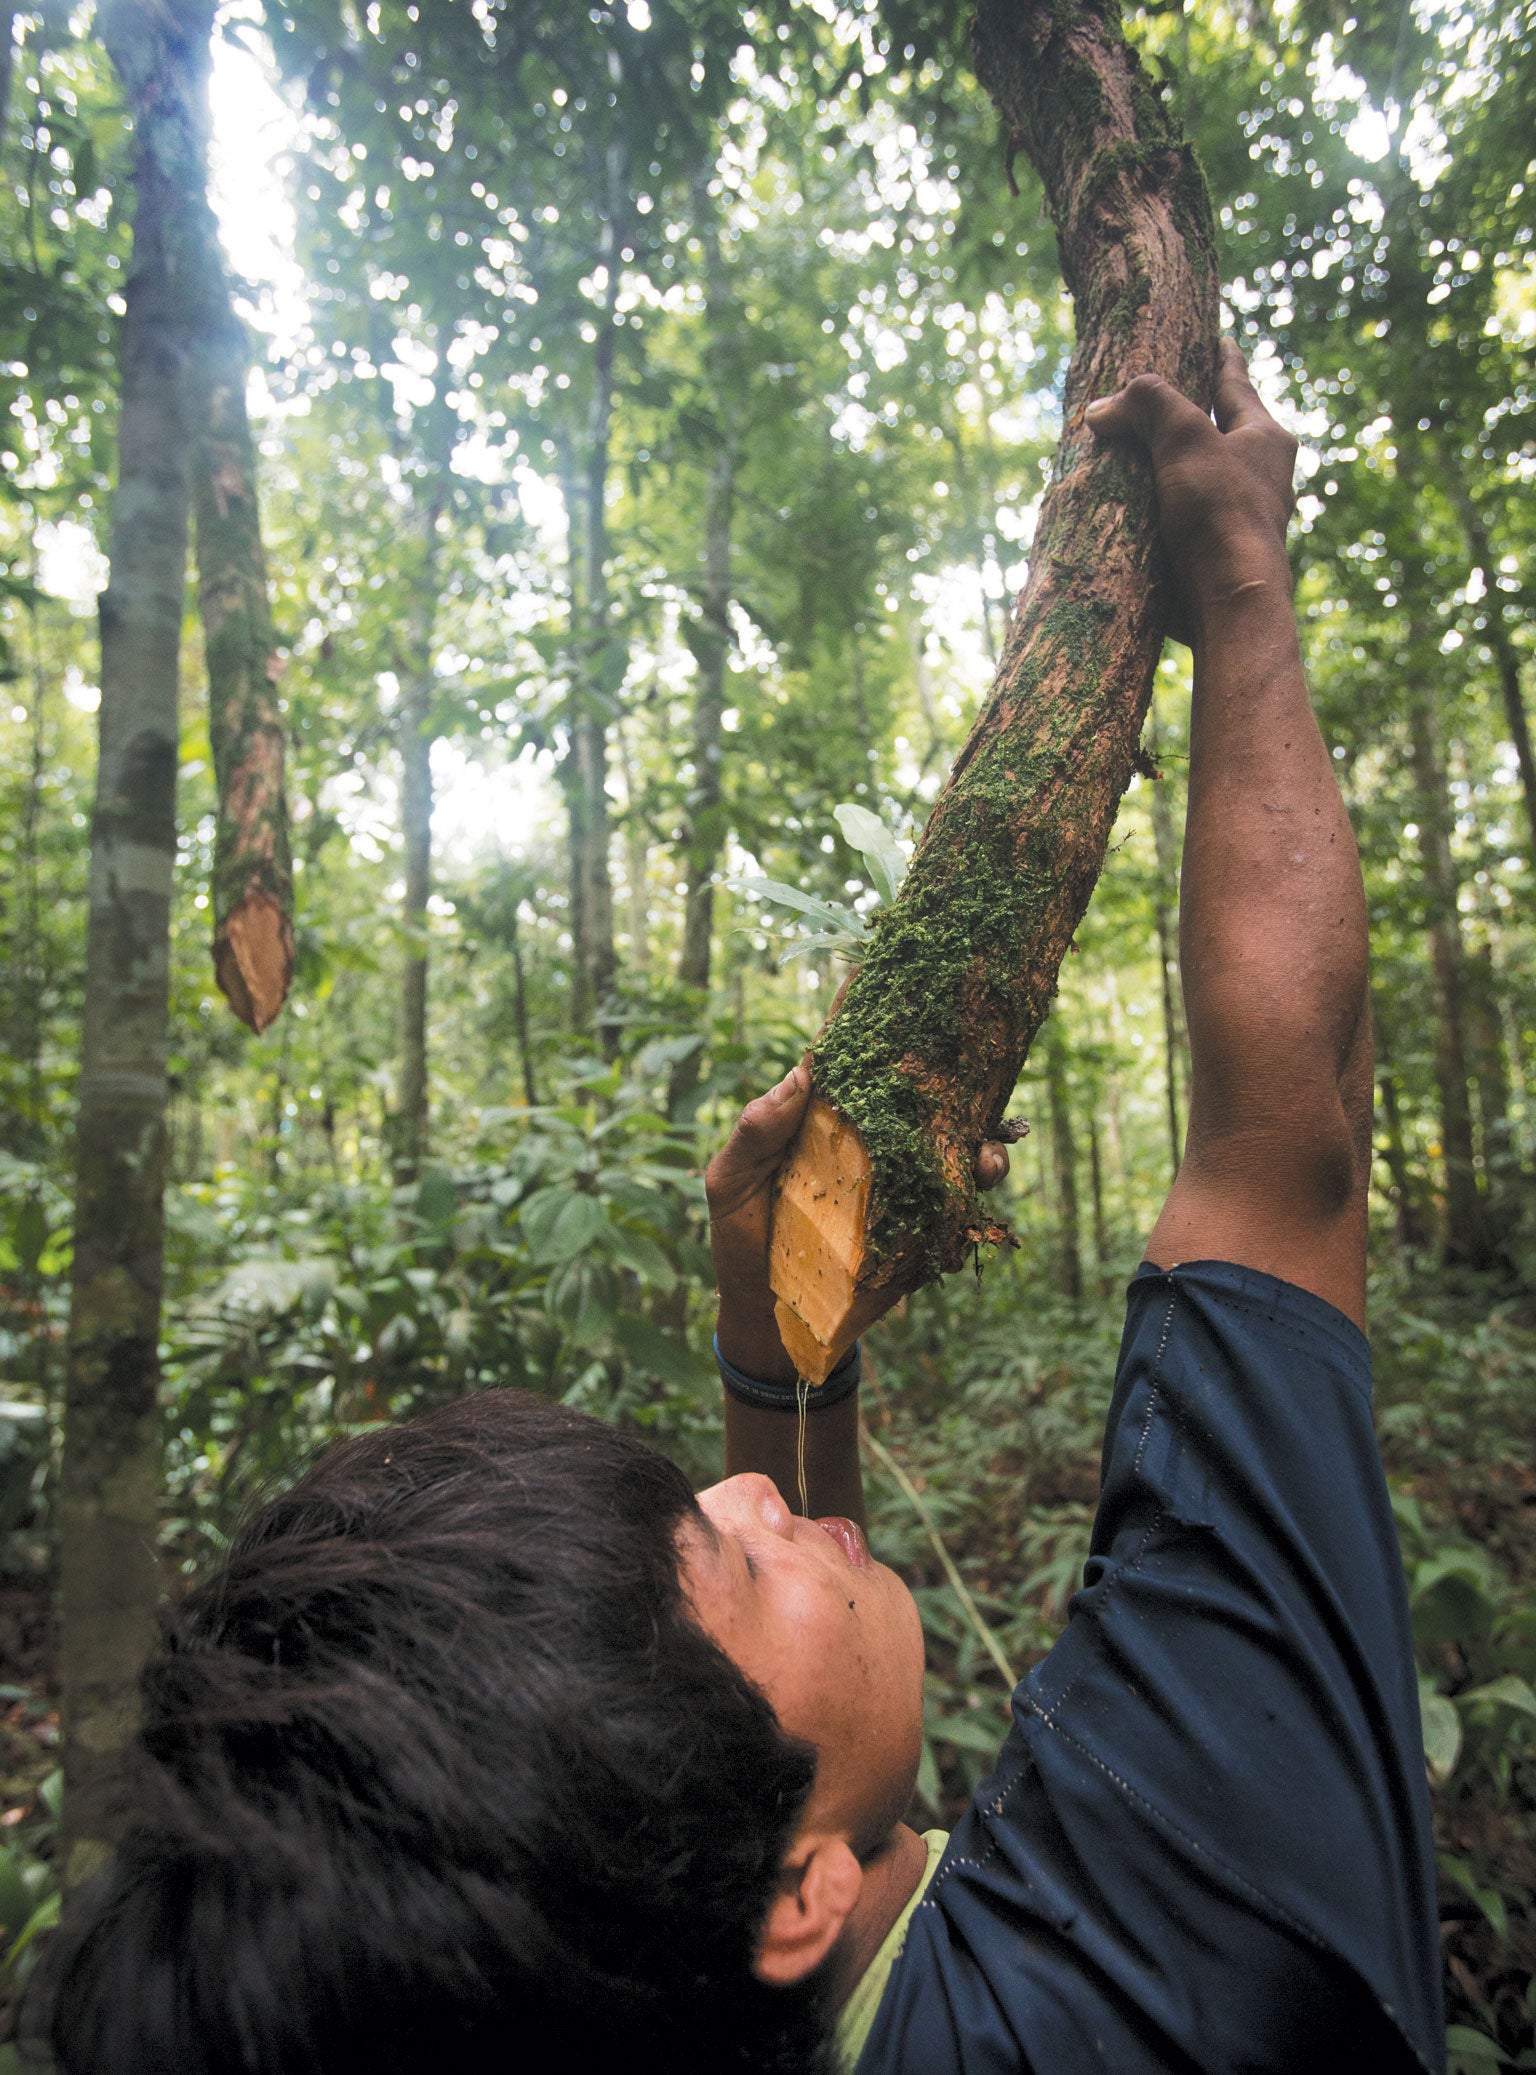 Tsimane' teenager drinks water from a vine in the Bolivian Amazon.